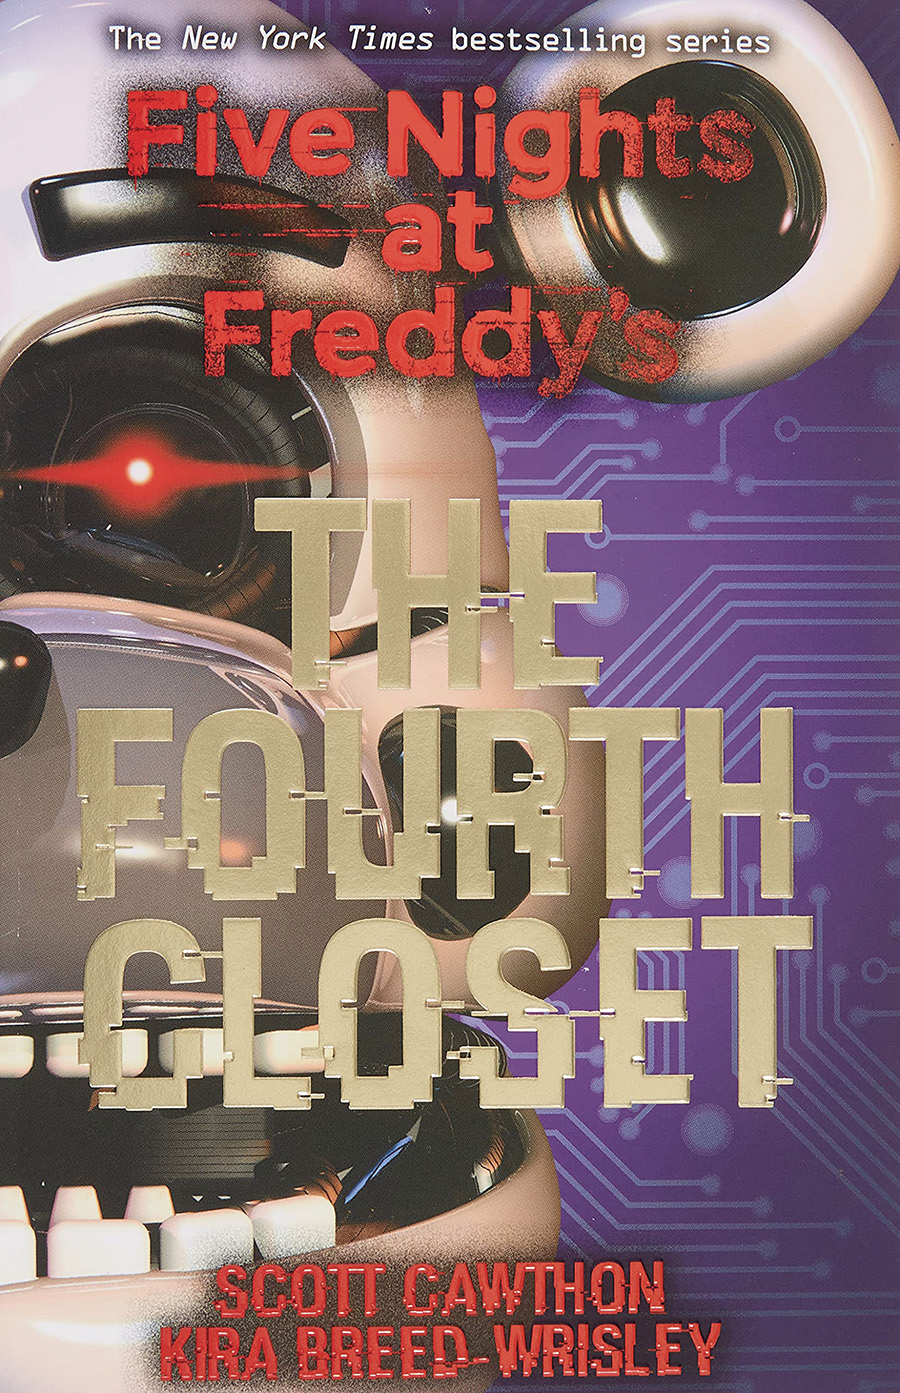 Five Nights At Freddys The Graphic Novel Vol 3 Fourth Closet HC